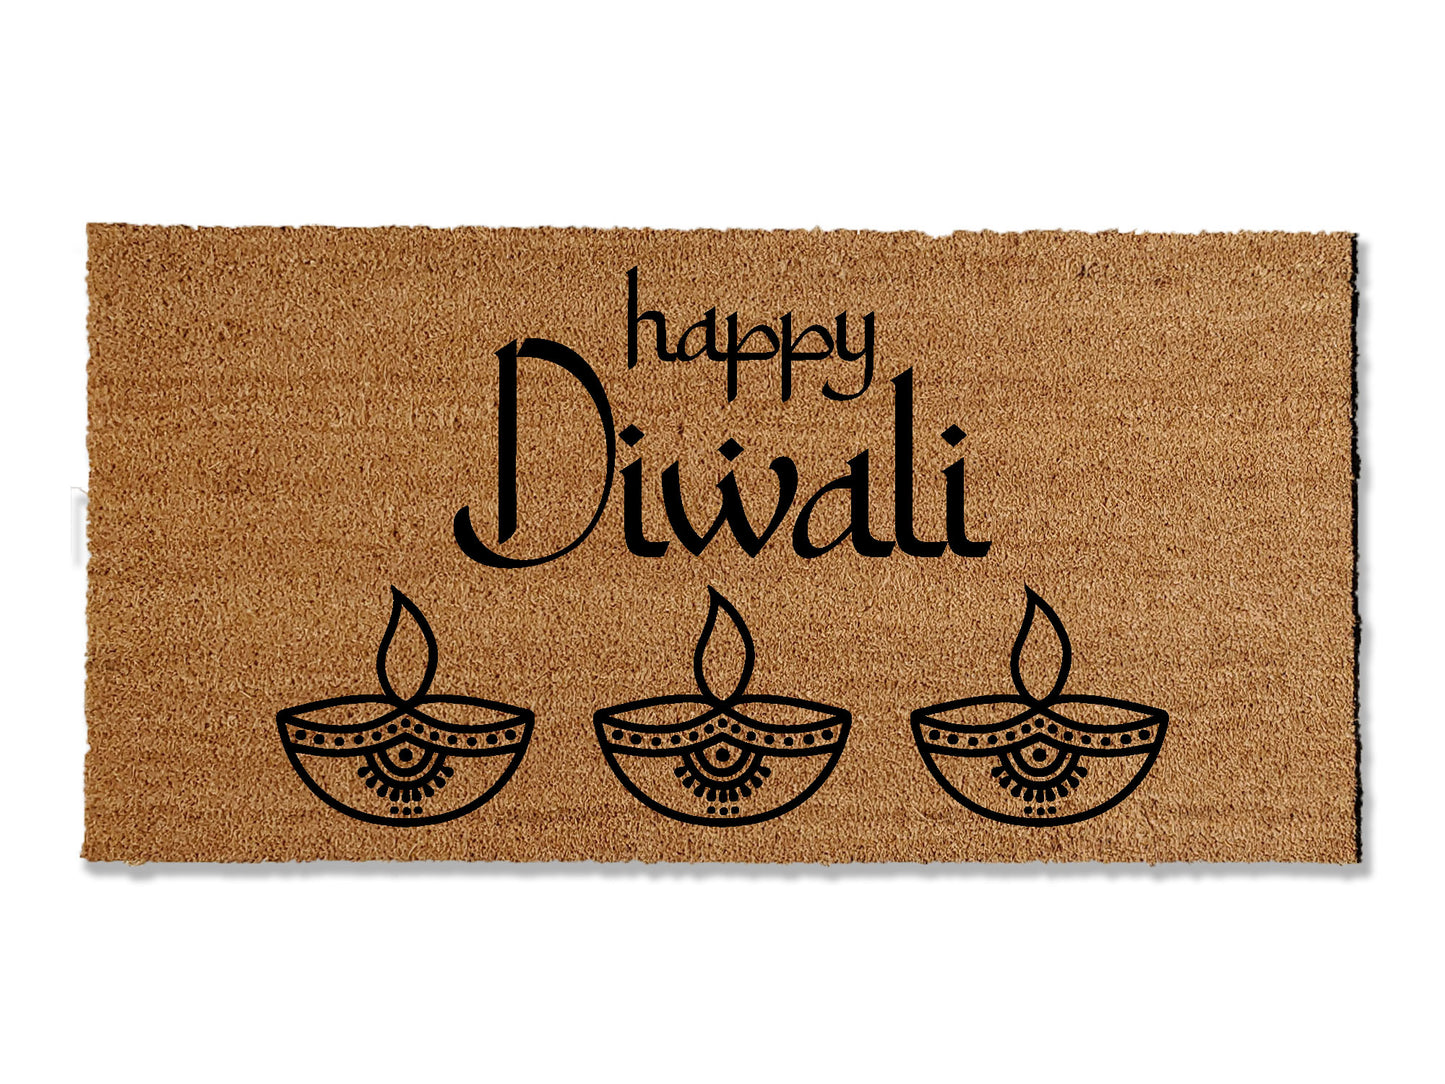 Illuminate your entryway with our festive coir doormat wishing 'Happy Diwali,' celebrating the Festival of Lights. Available in various sizes, it's the perfect way to welcome guests during this wonderful time of year.